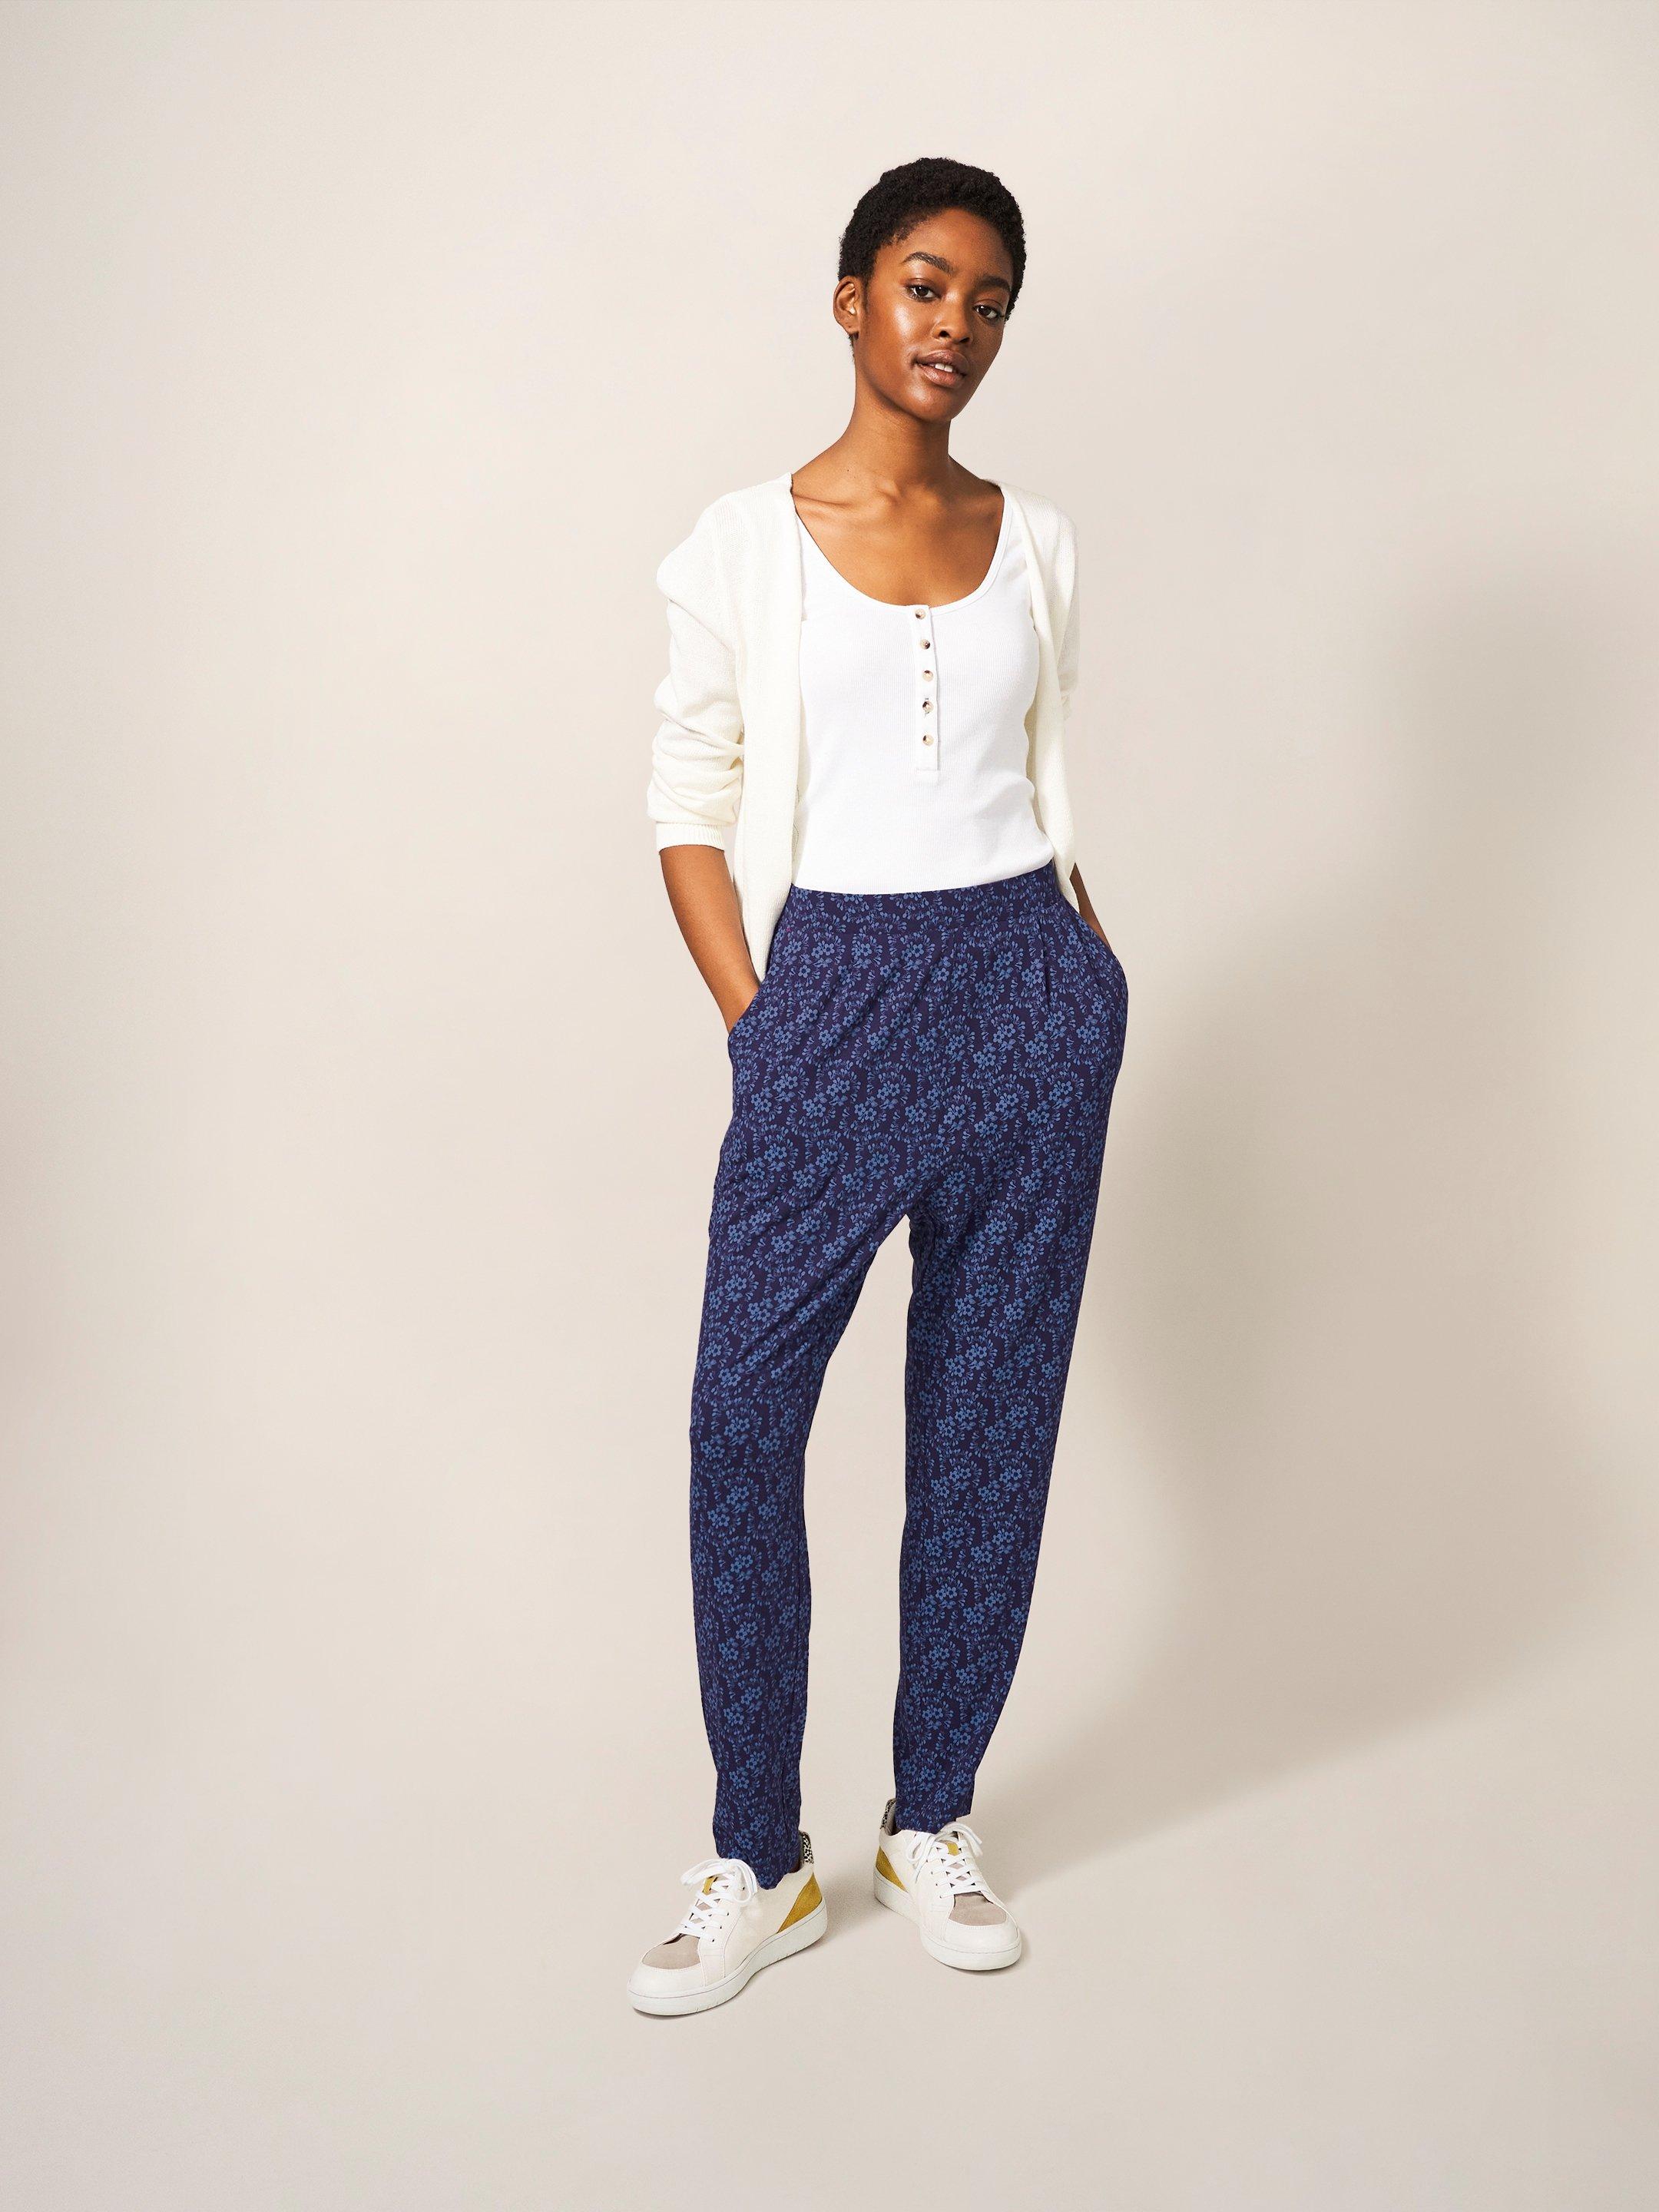 Maison Eco Vero Jersey Trousers in NAVY PR - MODEL FRONT